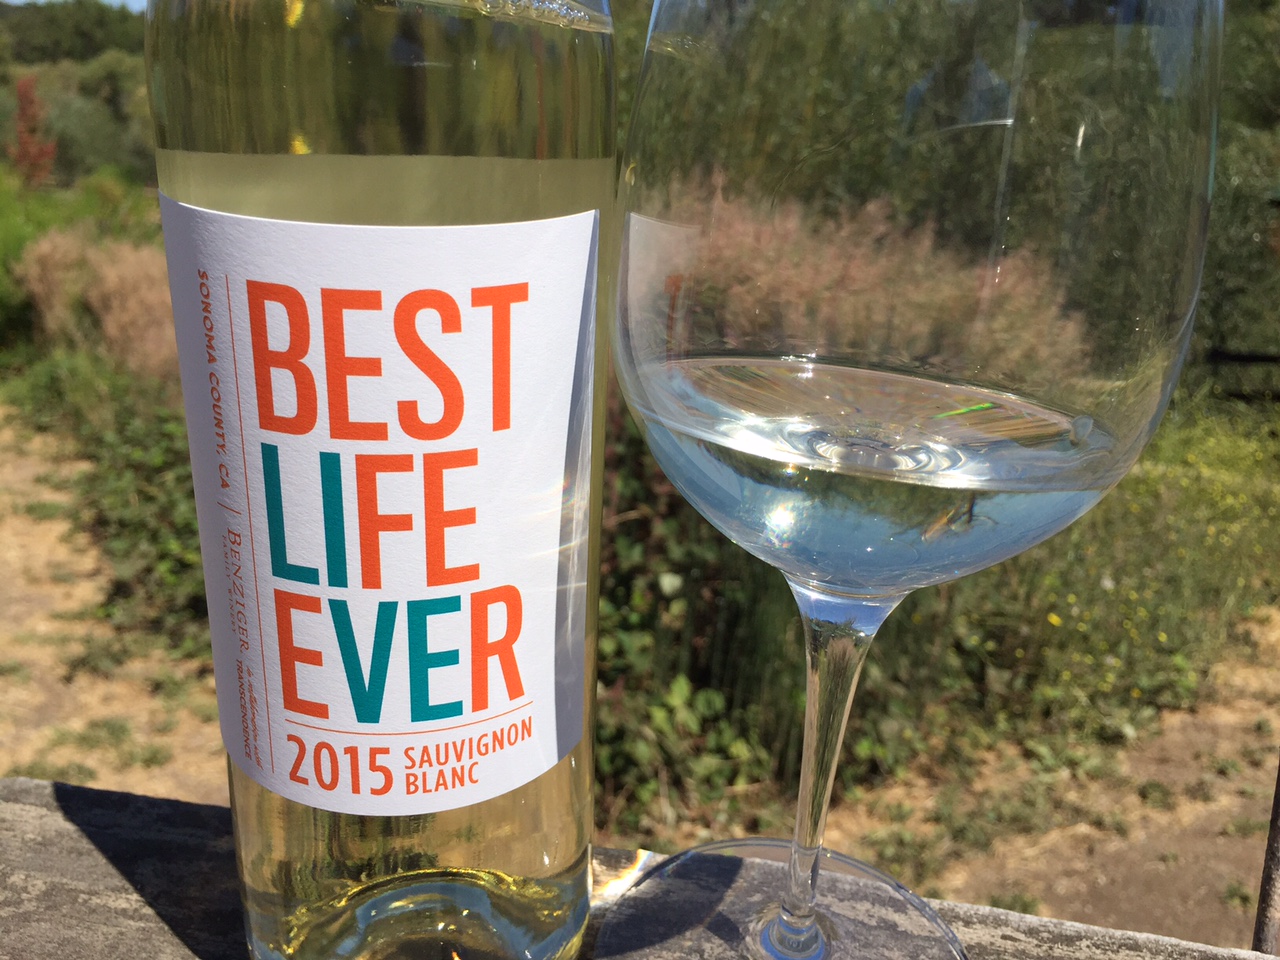 2015 Sauvignon Blanc Best Life Ever from Benziger Family Winery (credit: Foodie Chap/Liam Mayclem)